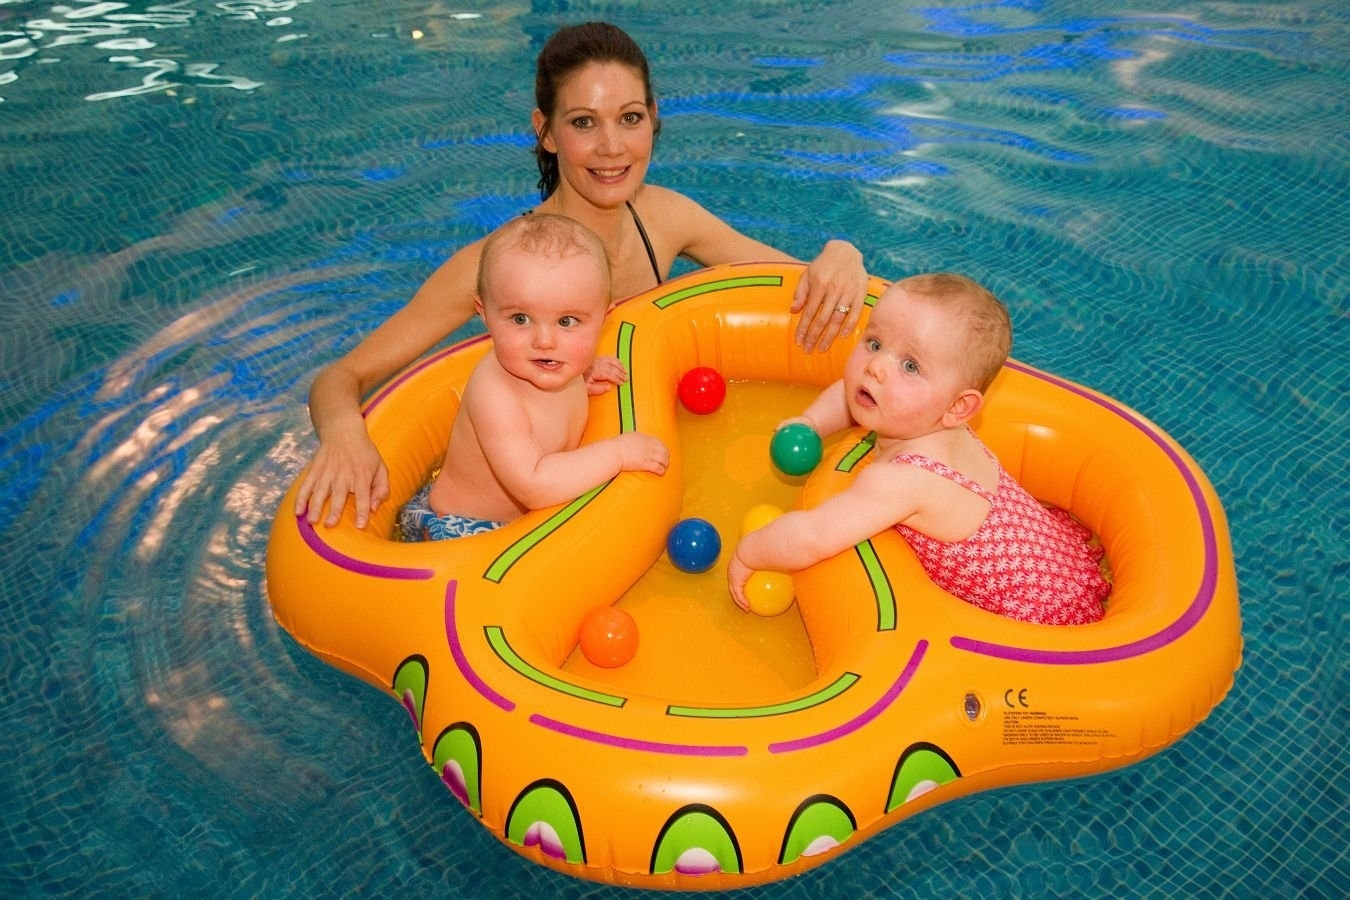 Person Pool Float Ideas on Foter